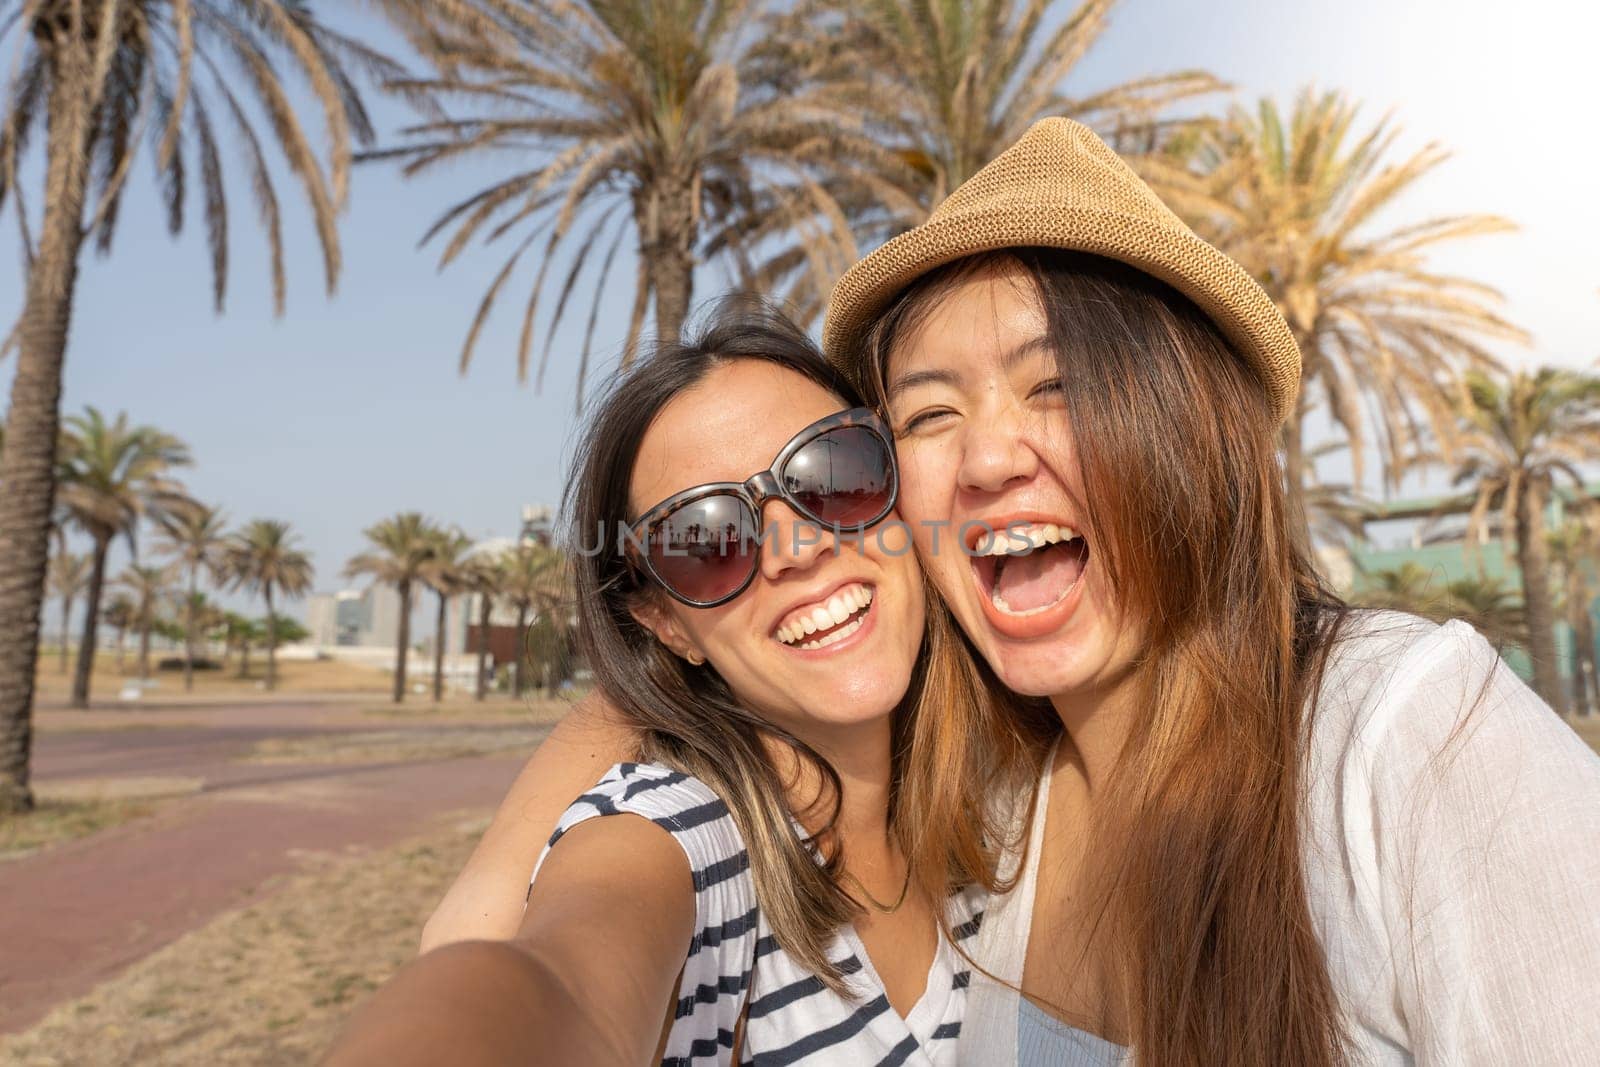 Selfie of happy two friends laughing and holding each other in the beach. Cheerful girls embracing each other. High quality photo